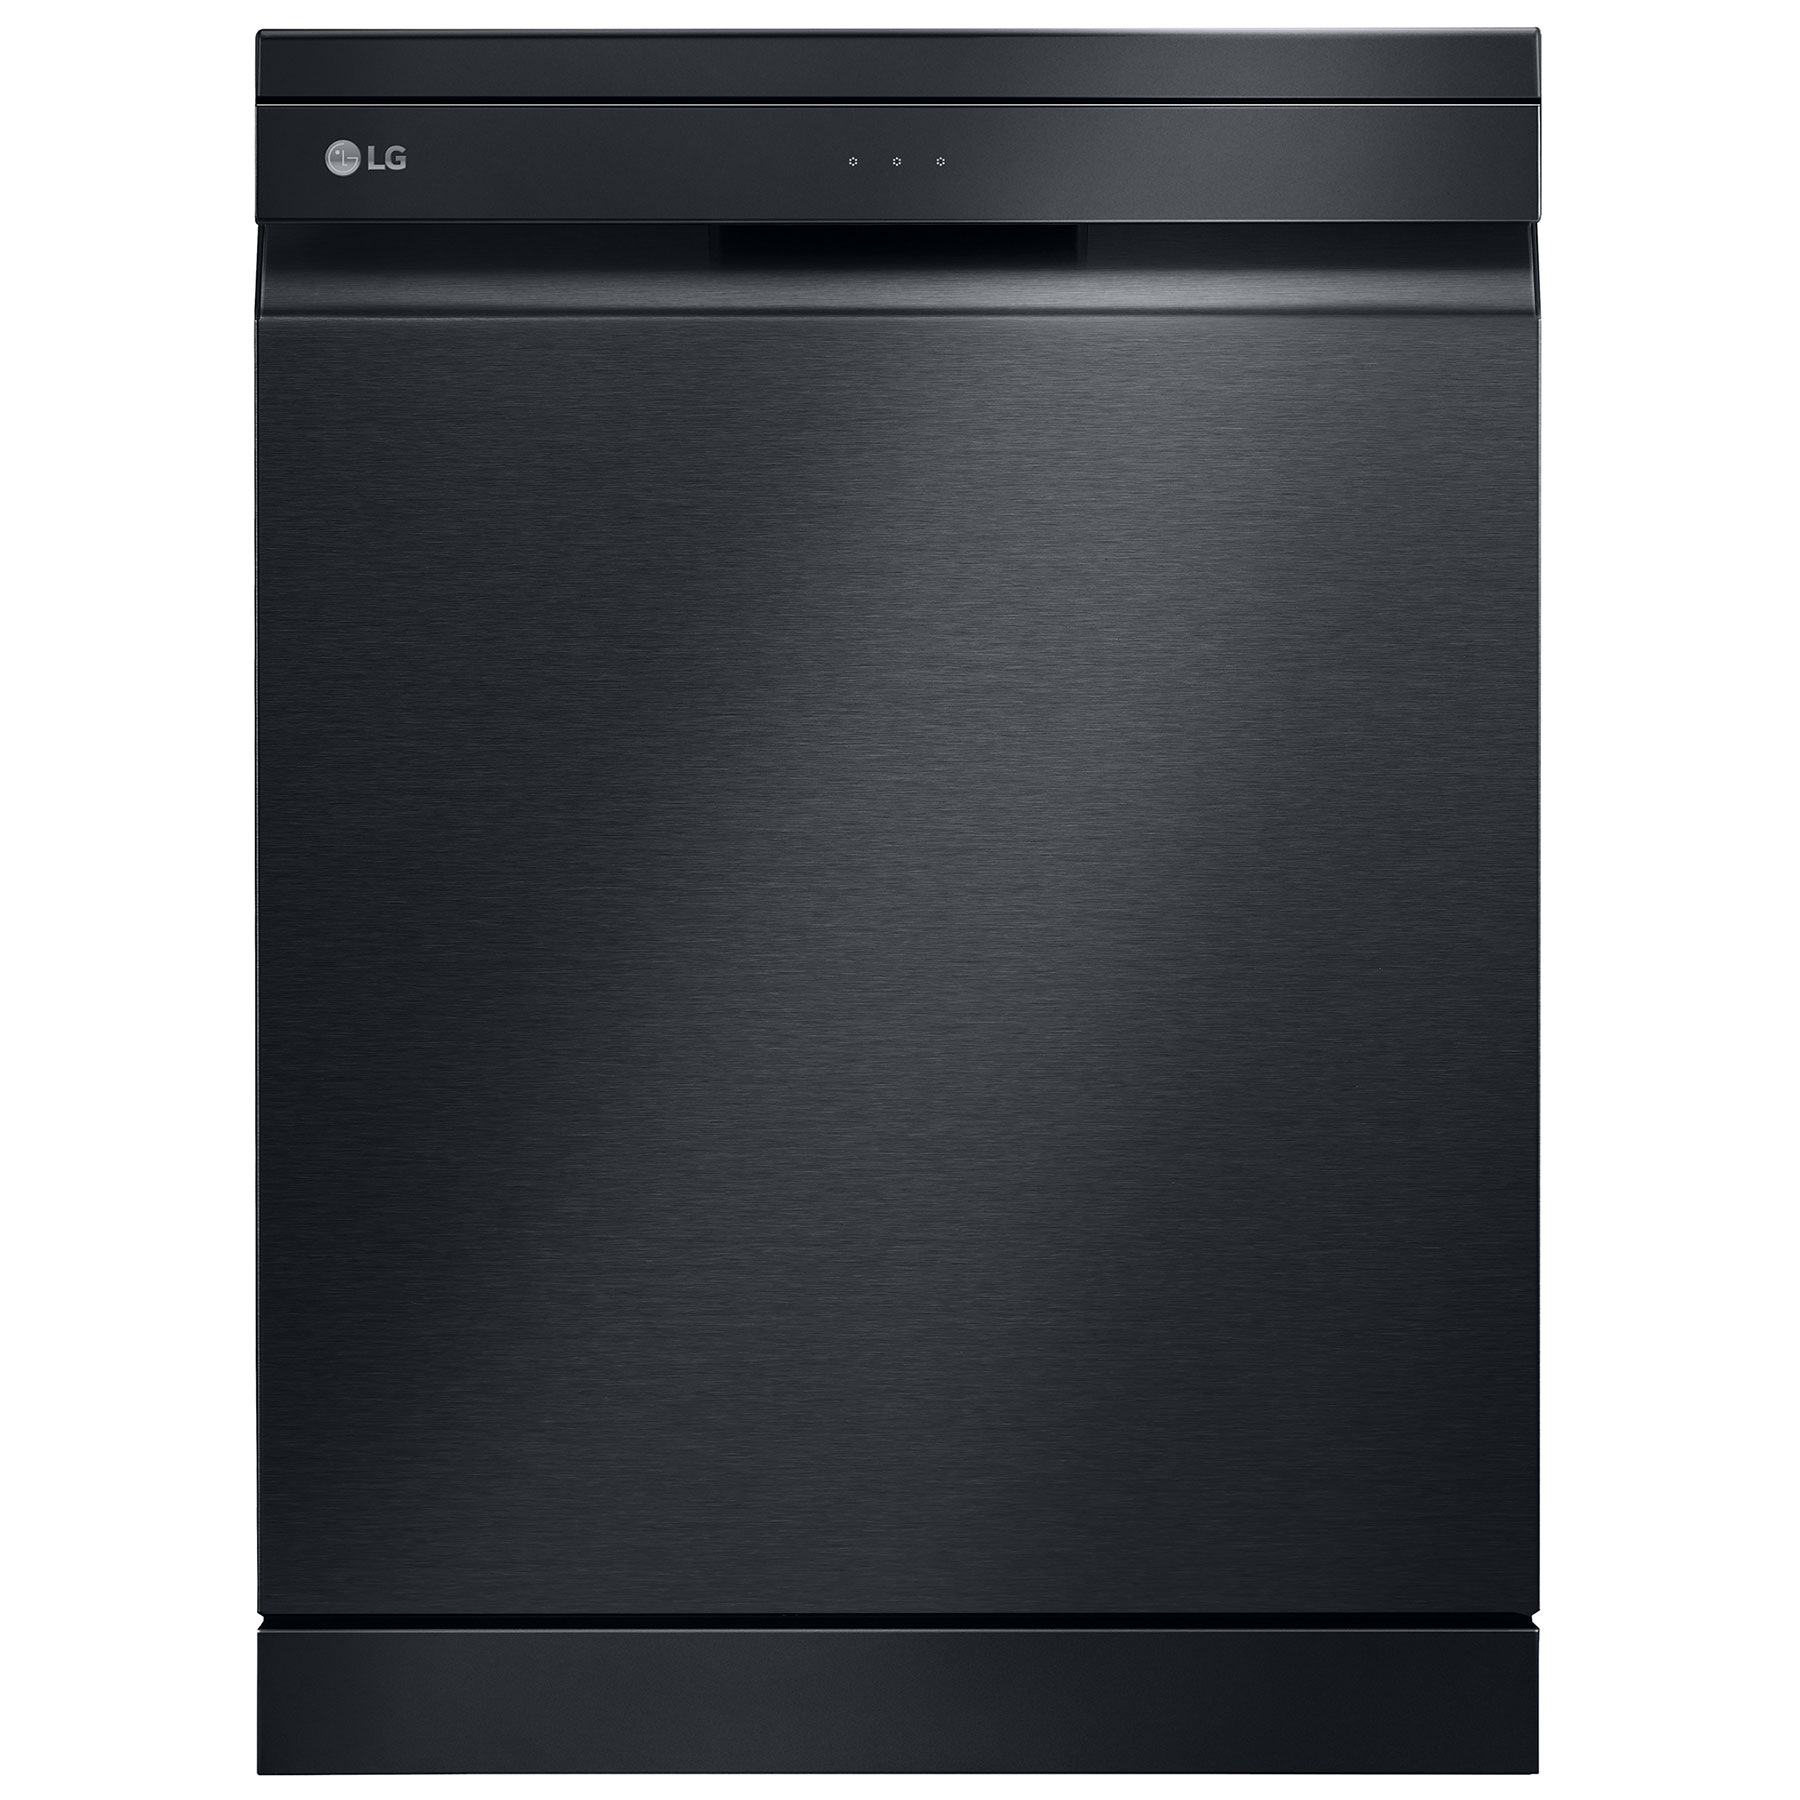 Image of LG DF455HMS 60cm Dishwasher in Black 14 Place Setting C Rated Wi Fi